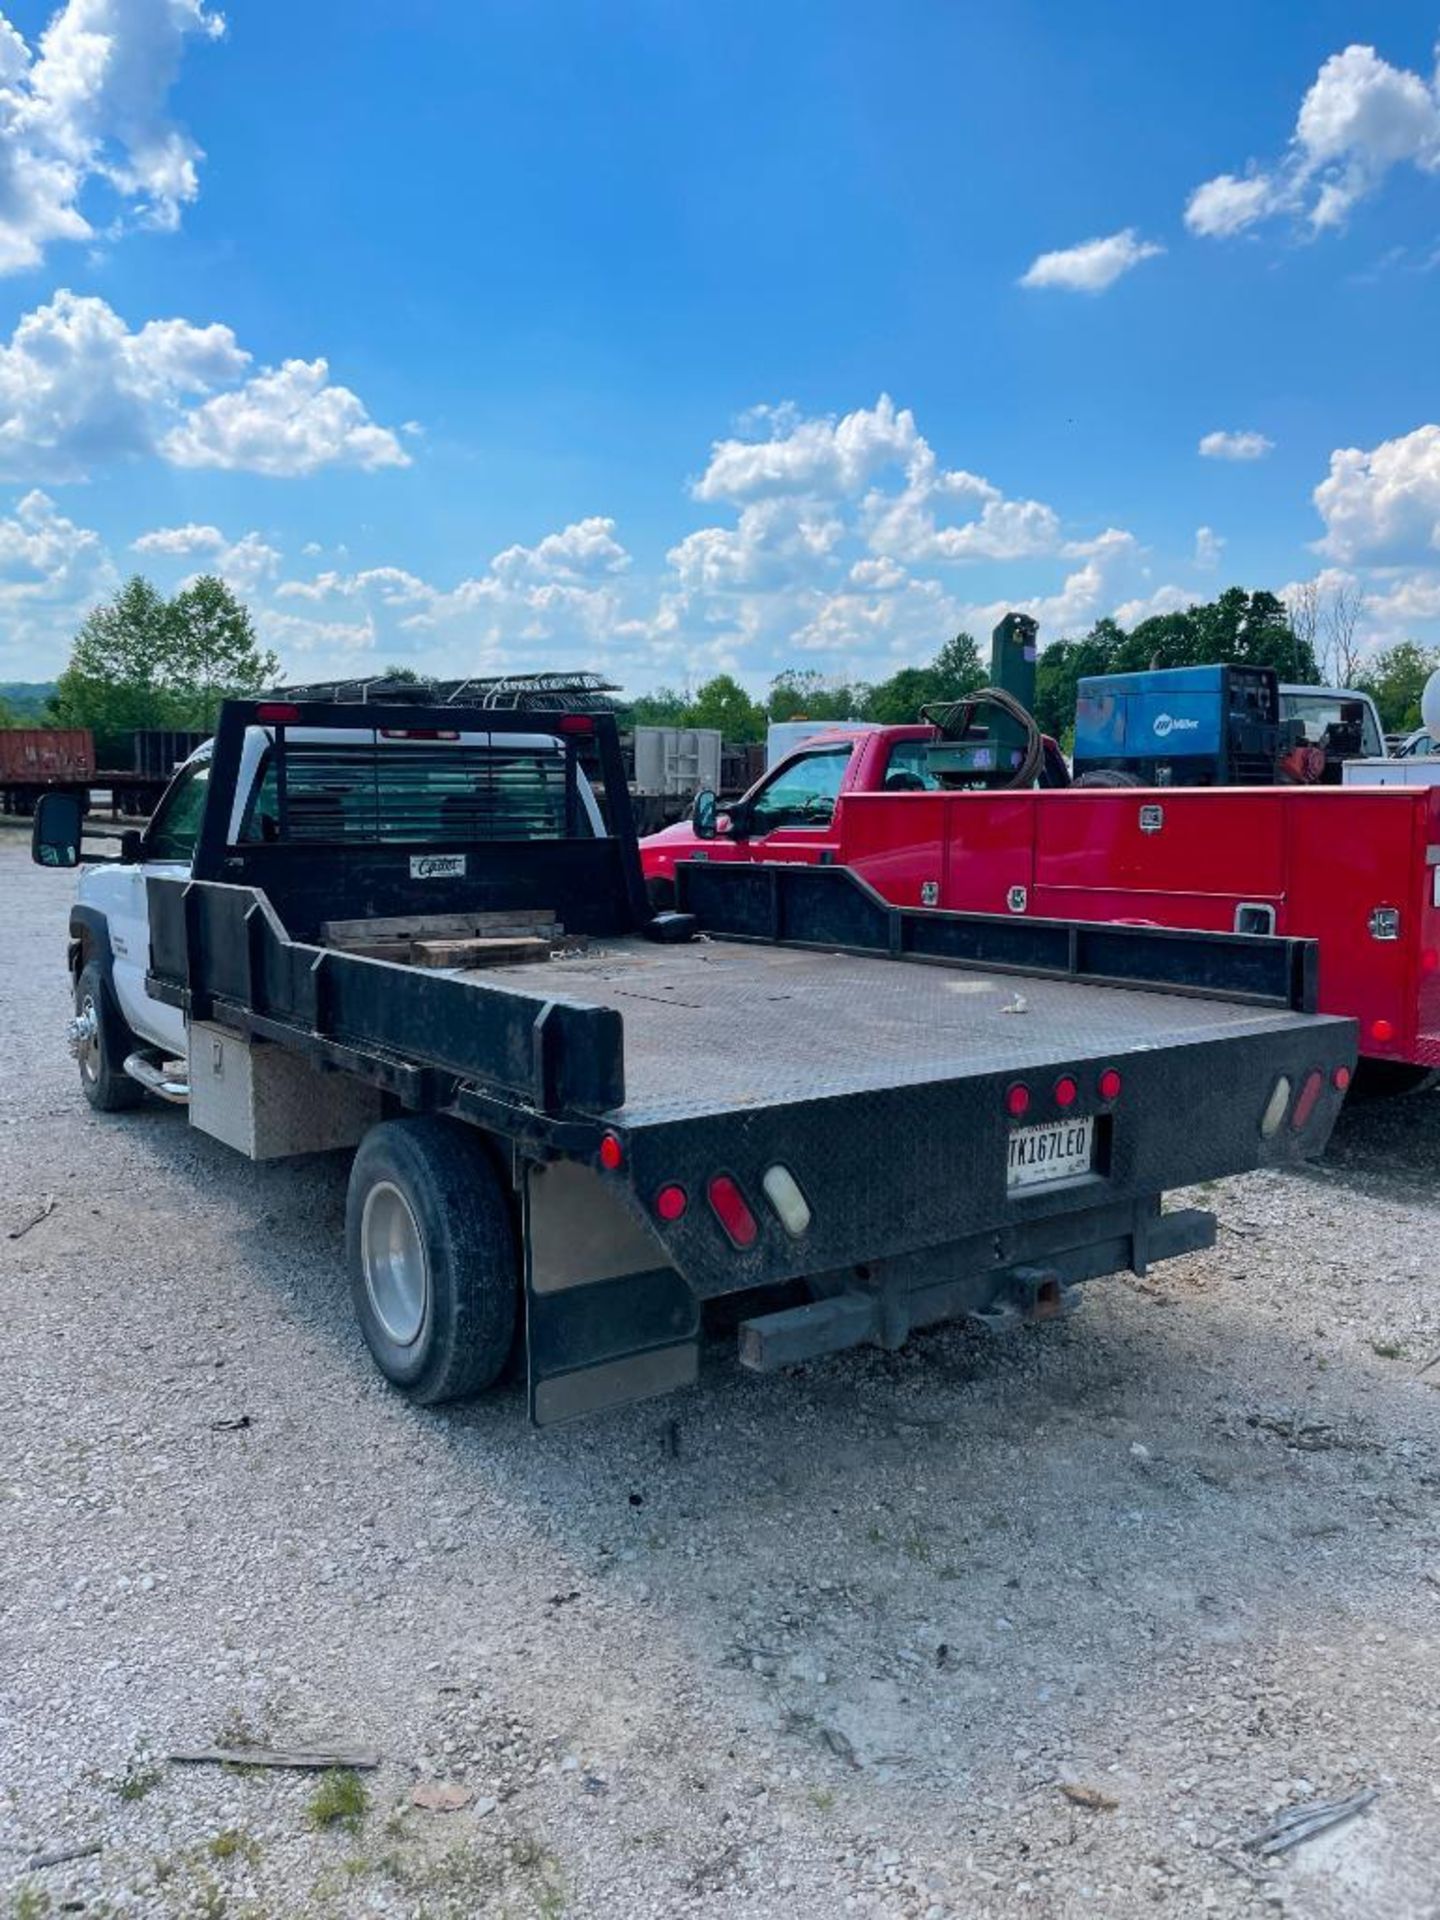 2003 CHEVY DURAMAX DUALLY FLATBED, DIESEL POWERED, AUTOMATIC TRANSMISSION, 12' FLATBED, SINGLE - Image 2 of 4